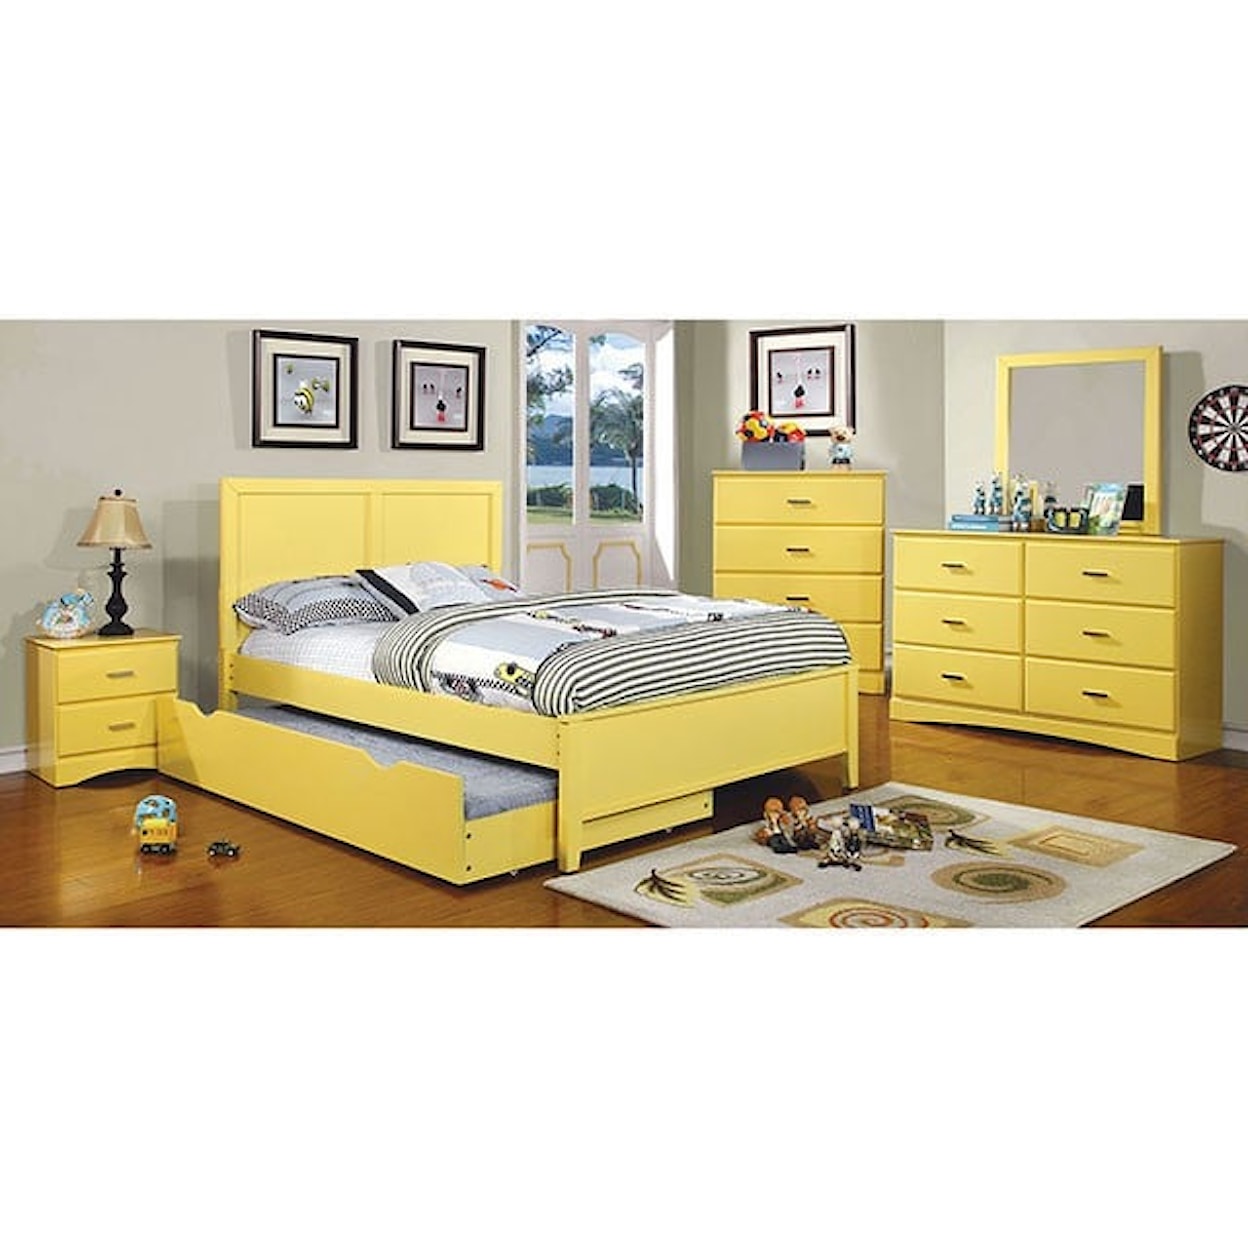 Furniture of America Prismo Youth Twin Bed with Trundle